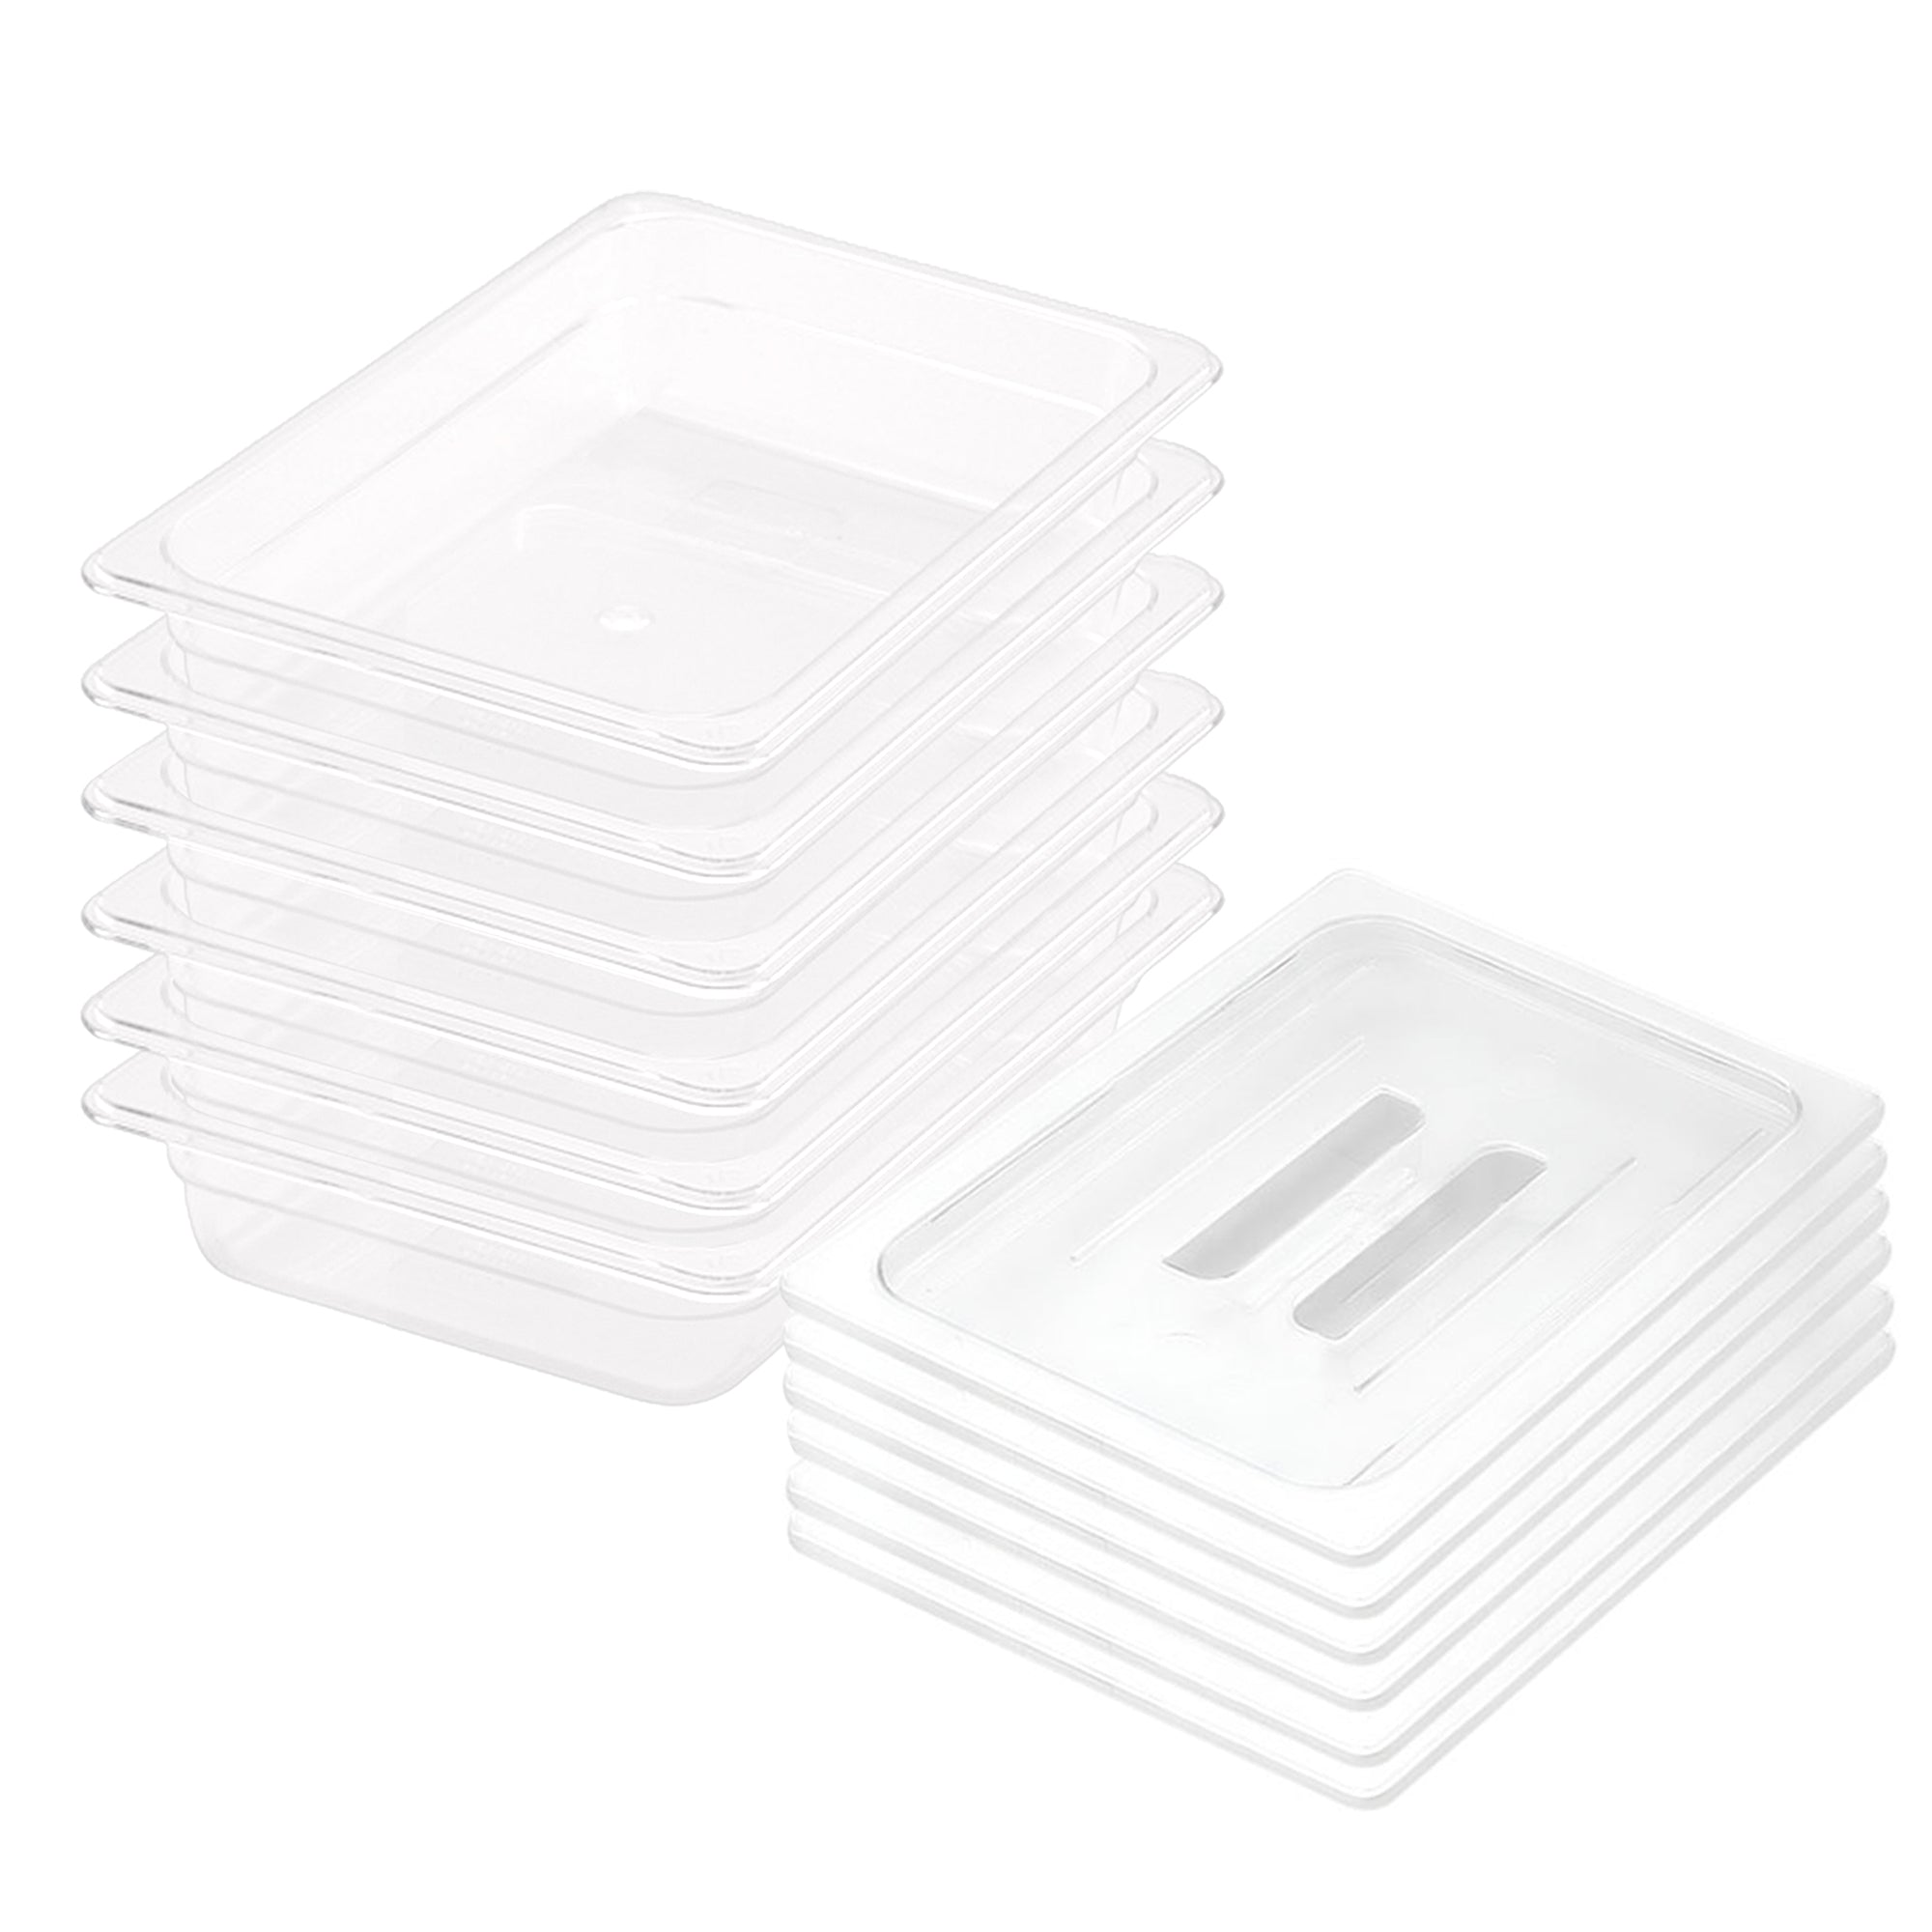 SOGA 65mm Clear Gastronorm GN Pan 1/2 Food Tray Storage Bundle of 6 with Lid